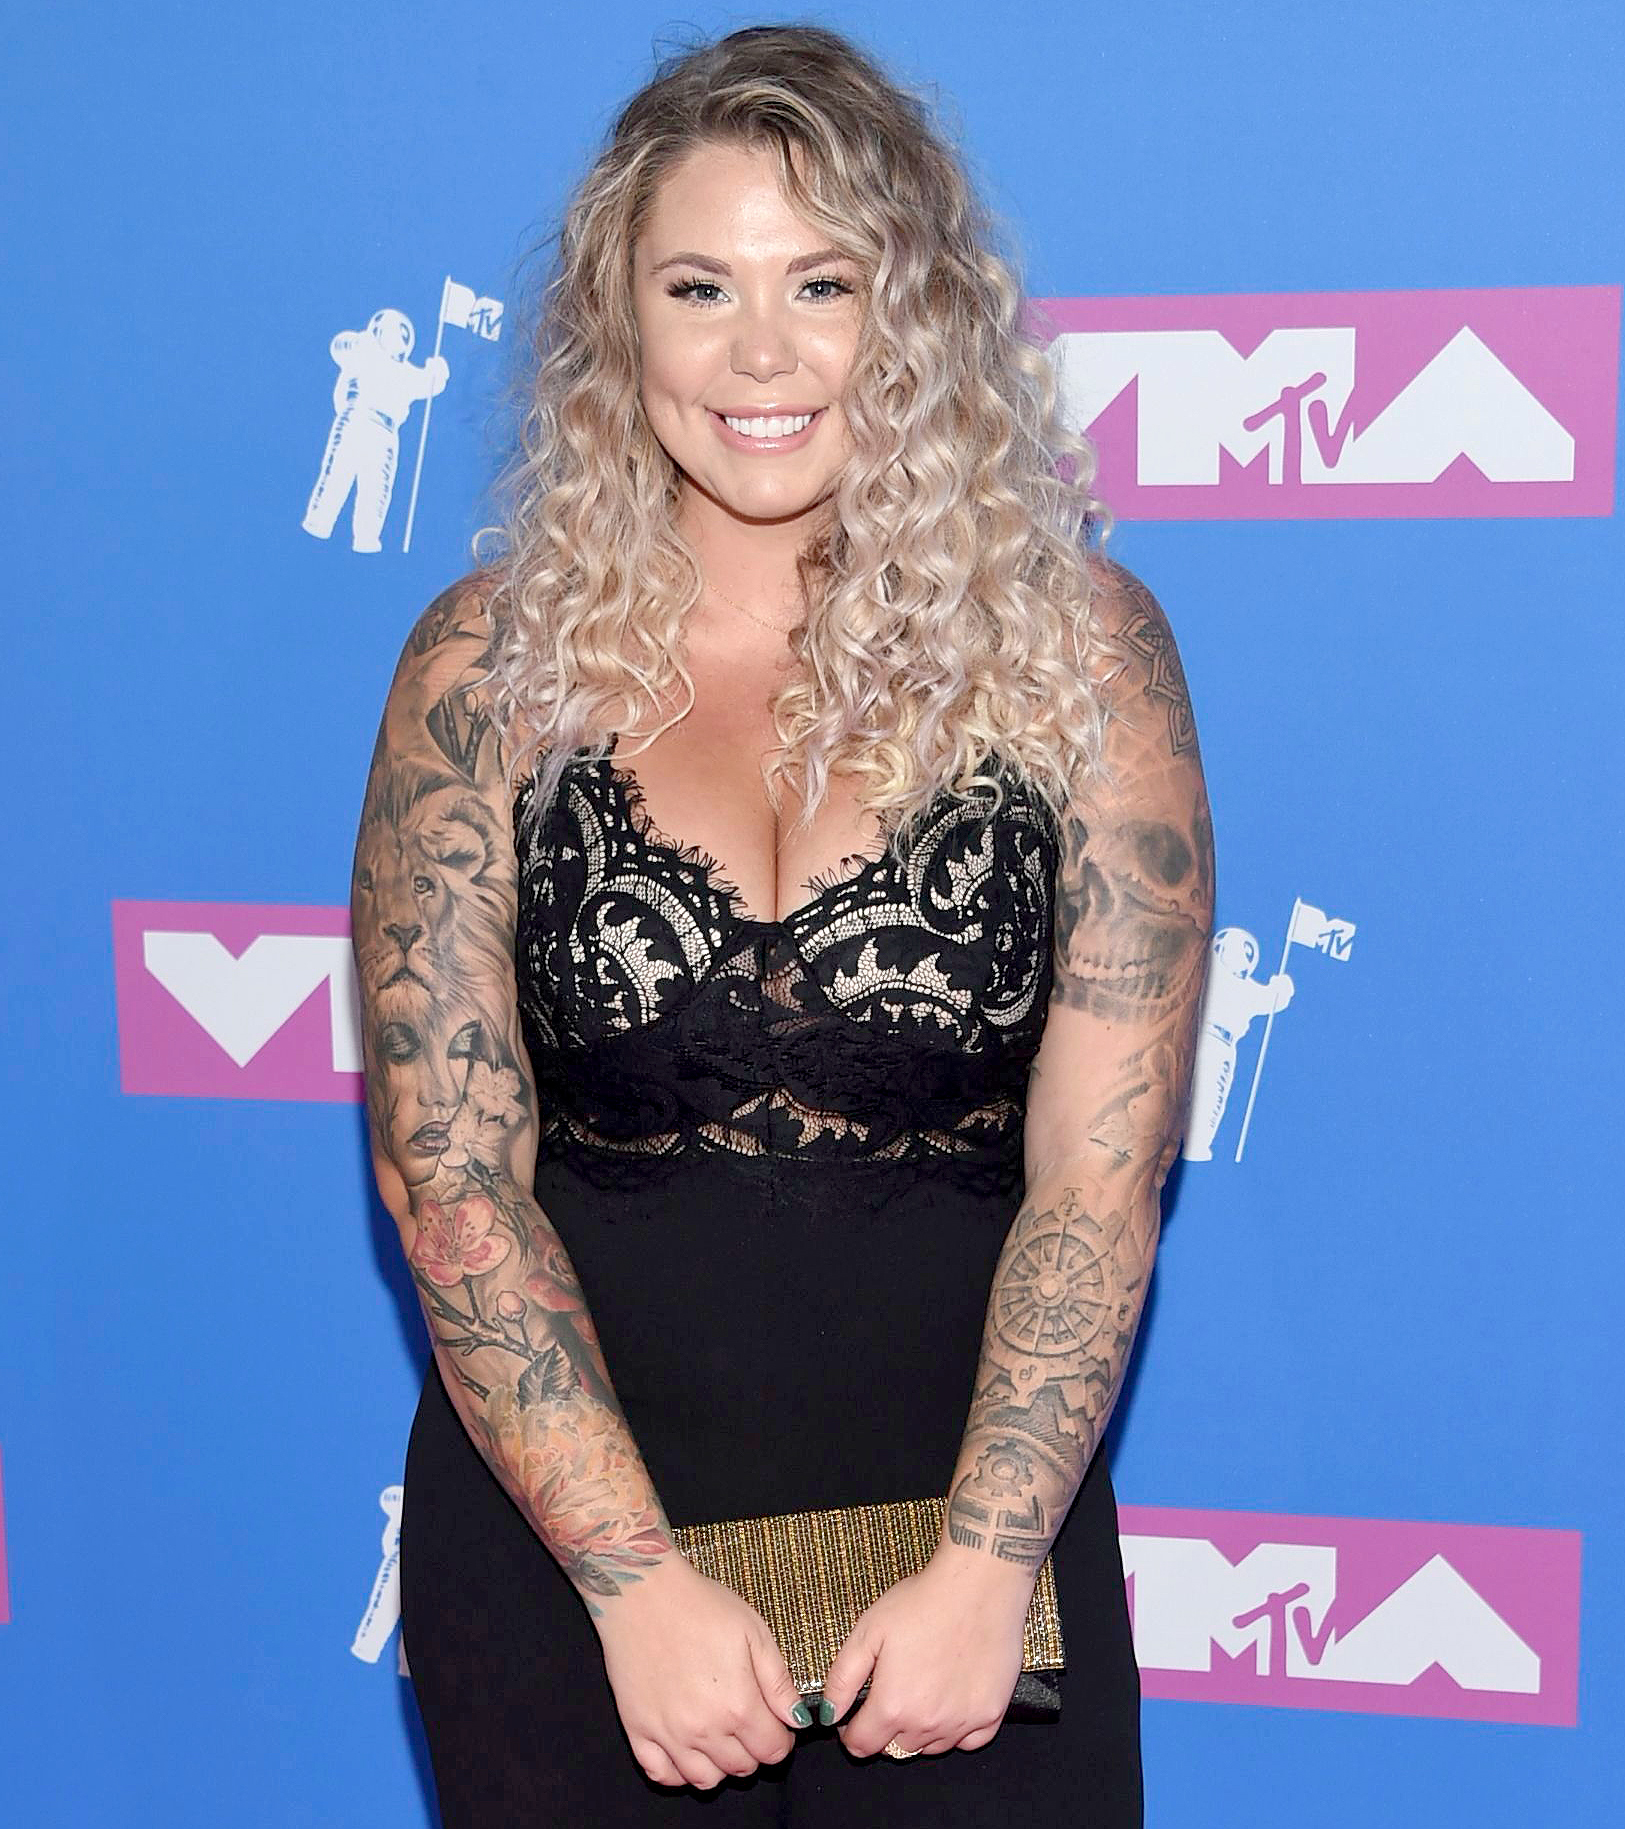 Teen Mom 2 Kailyn Lowry Goes Makeup Free Shares Photo of Growing Baby Bump